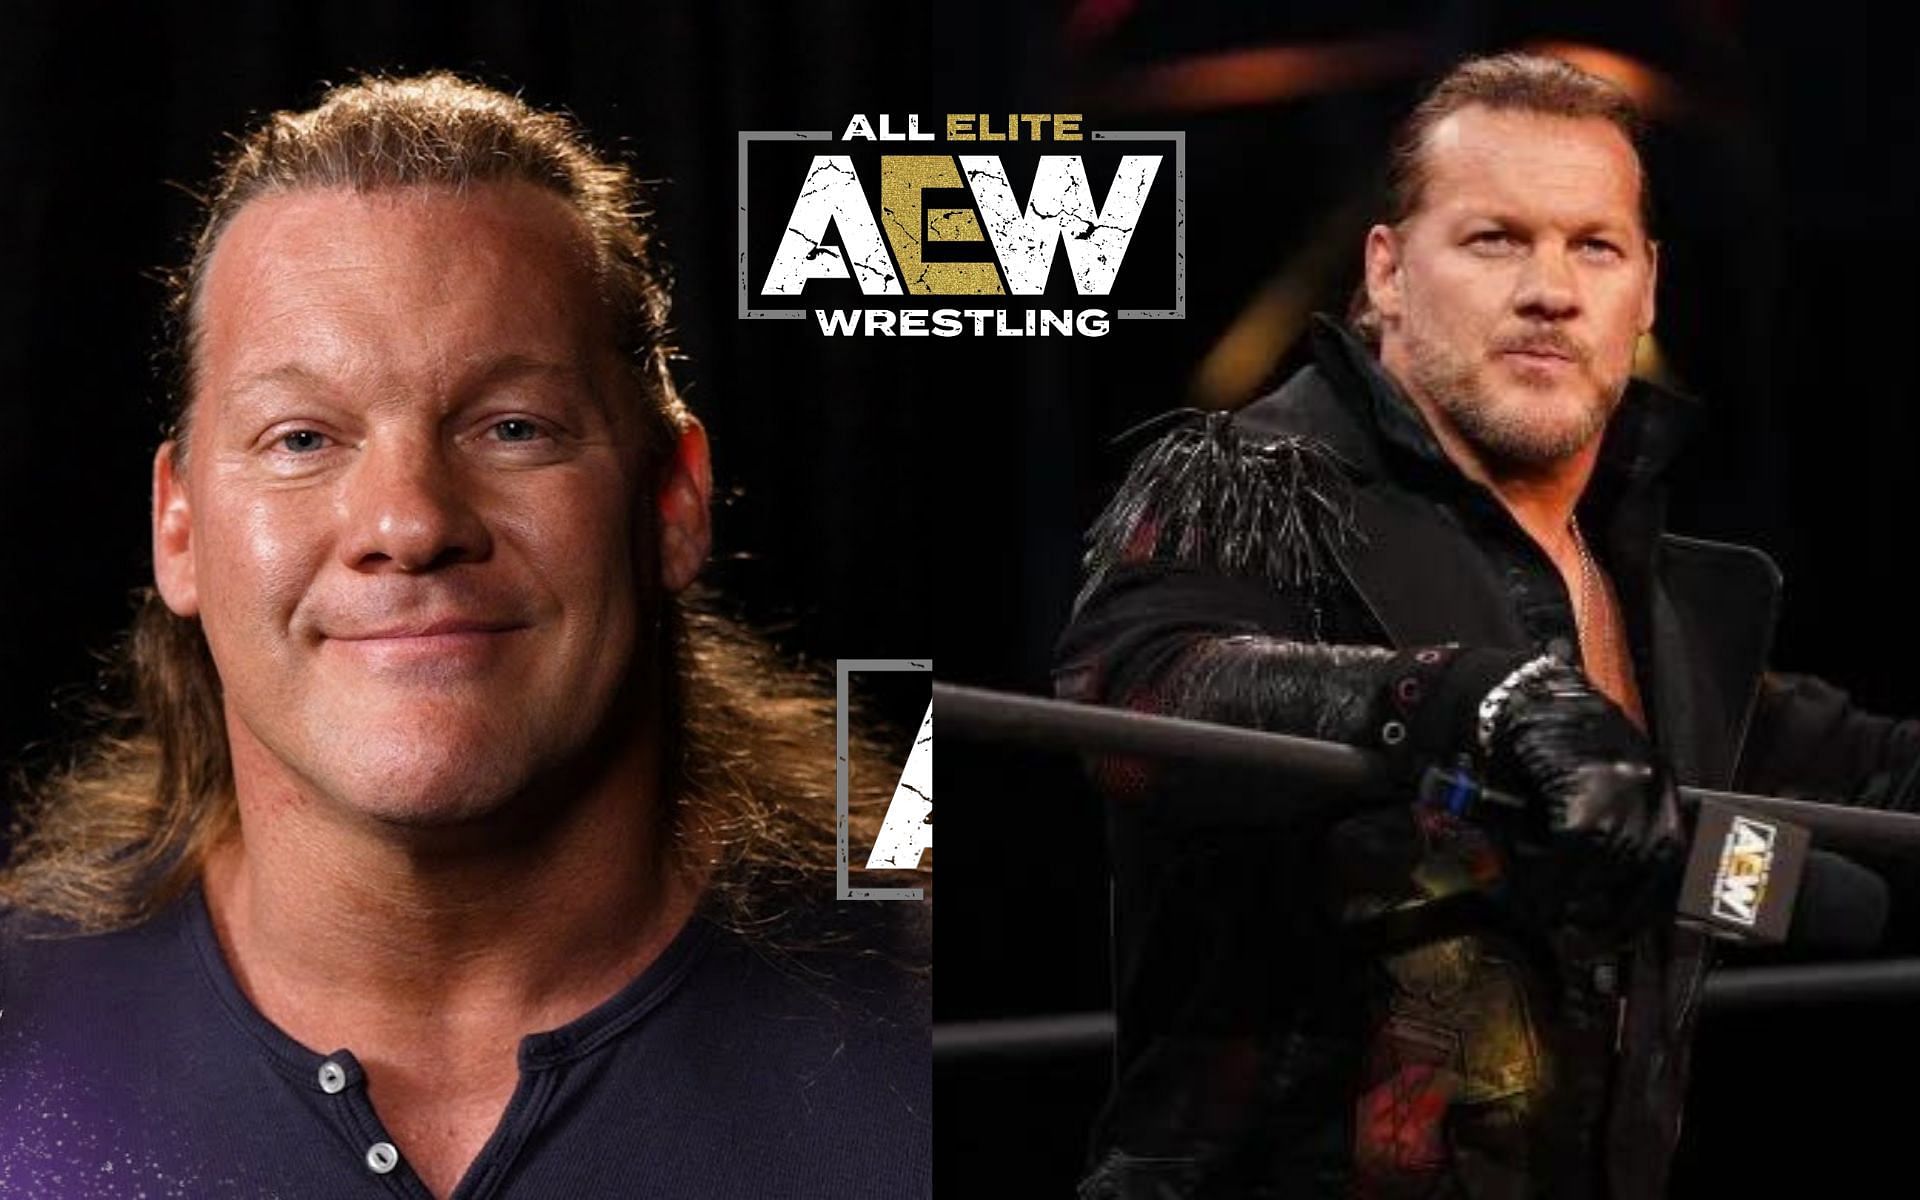 Chris Jericho plays a crucial role backstage in addition to in-ring performer at AEW